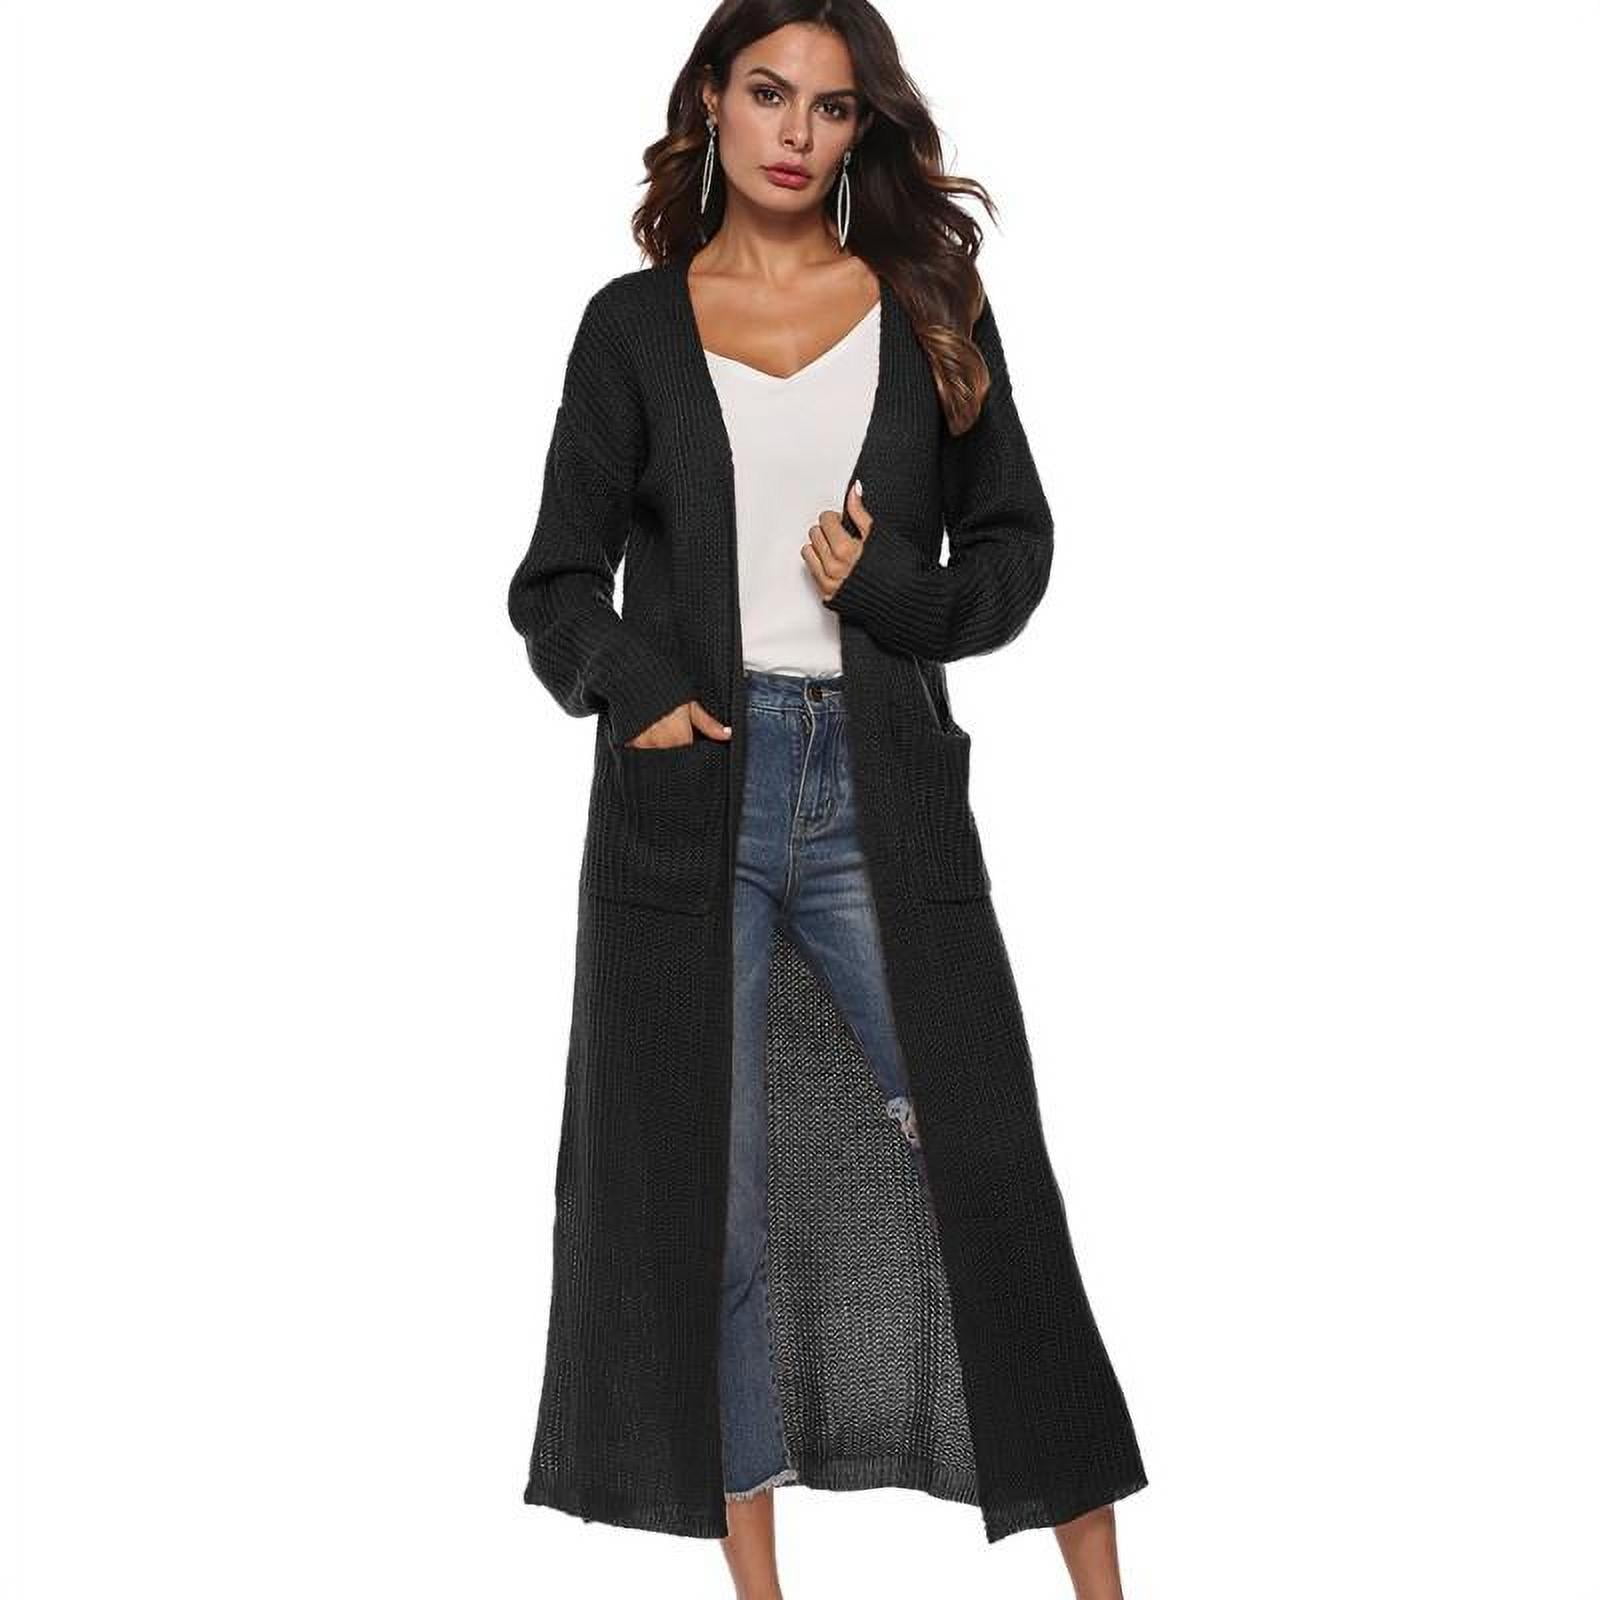 HONGJ Cardigan for Womens Fashion Long Sleeve Open Front Drape Lightweight Coat Leisure Button Long Dusters with Pocket 